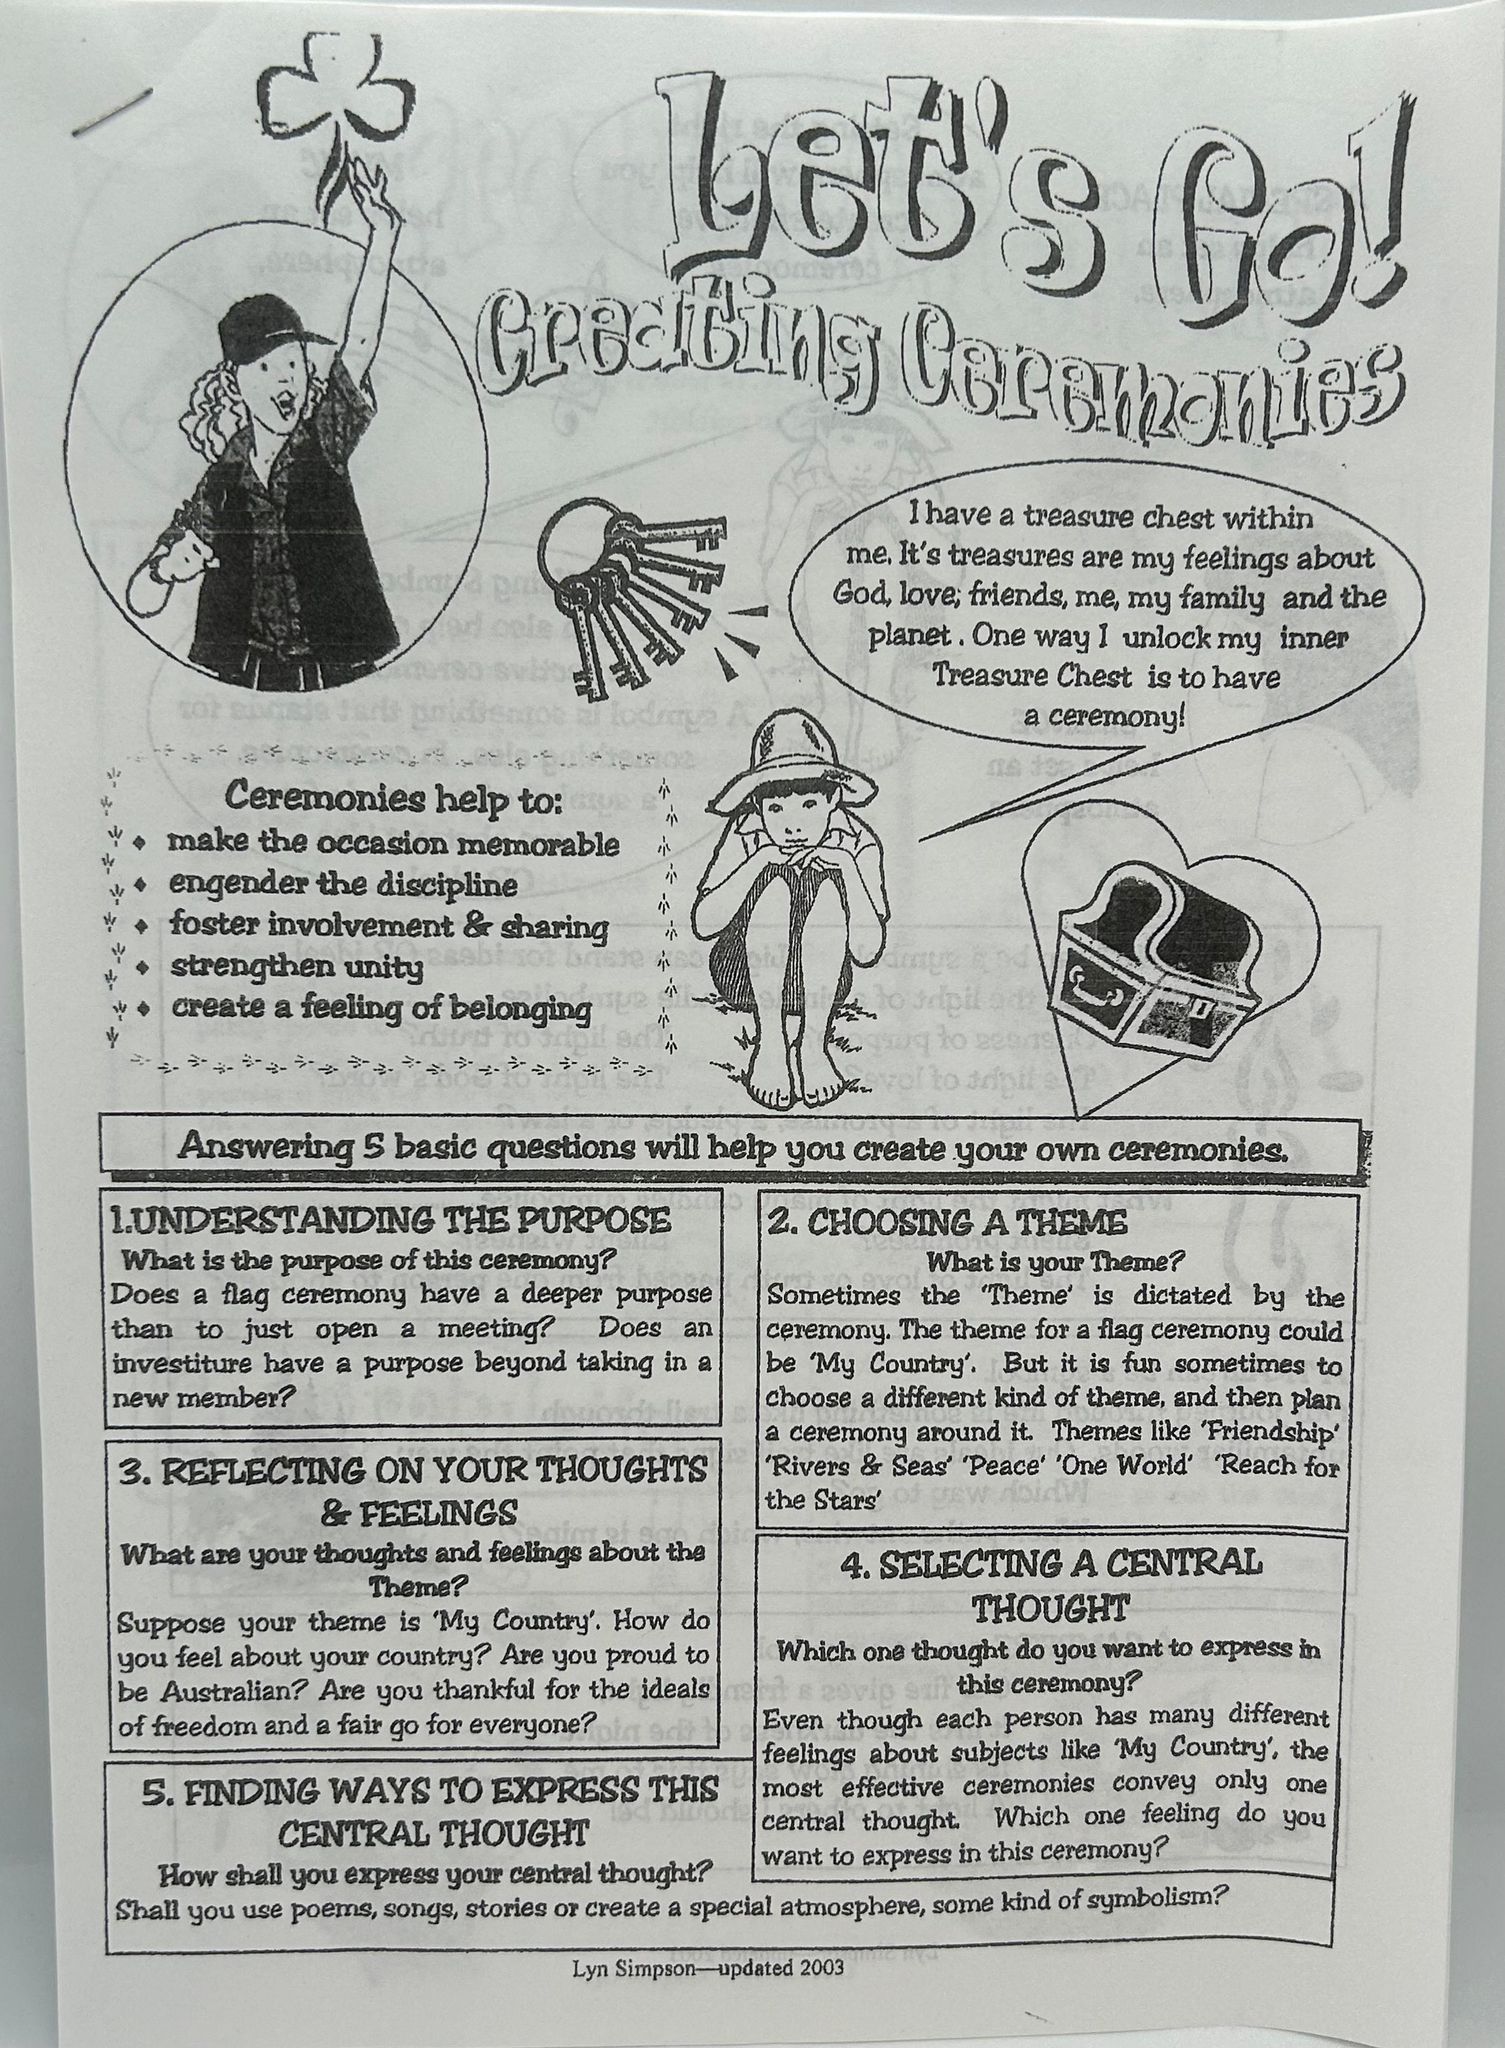 a paper based booklet about creating ceremonies